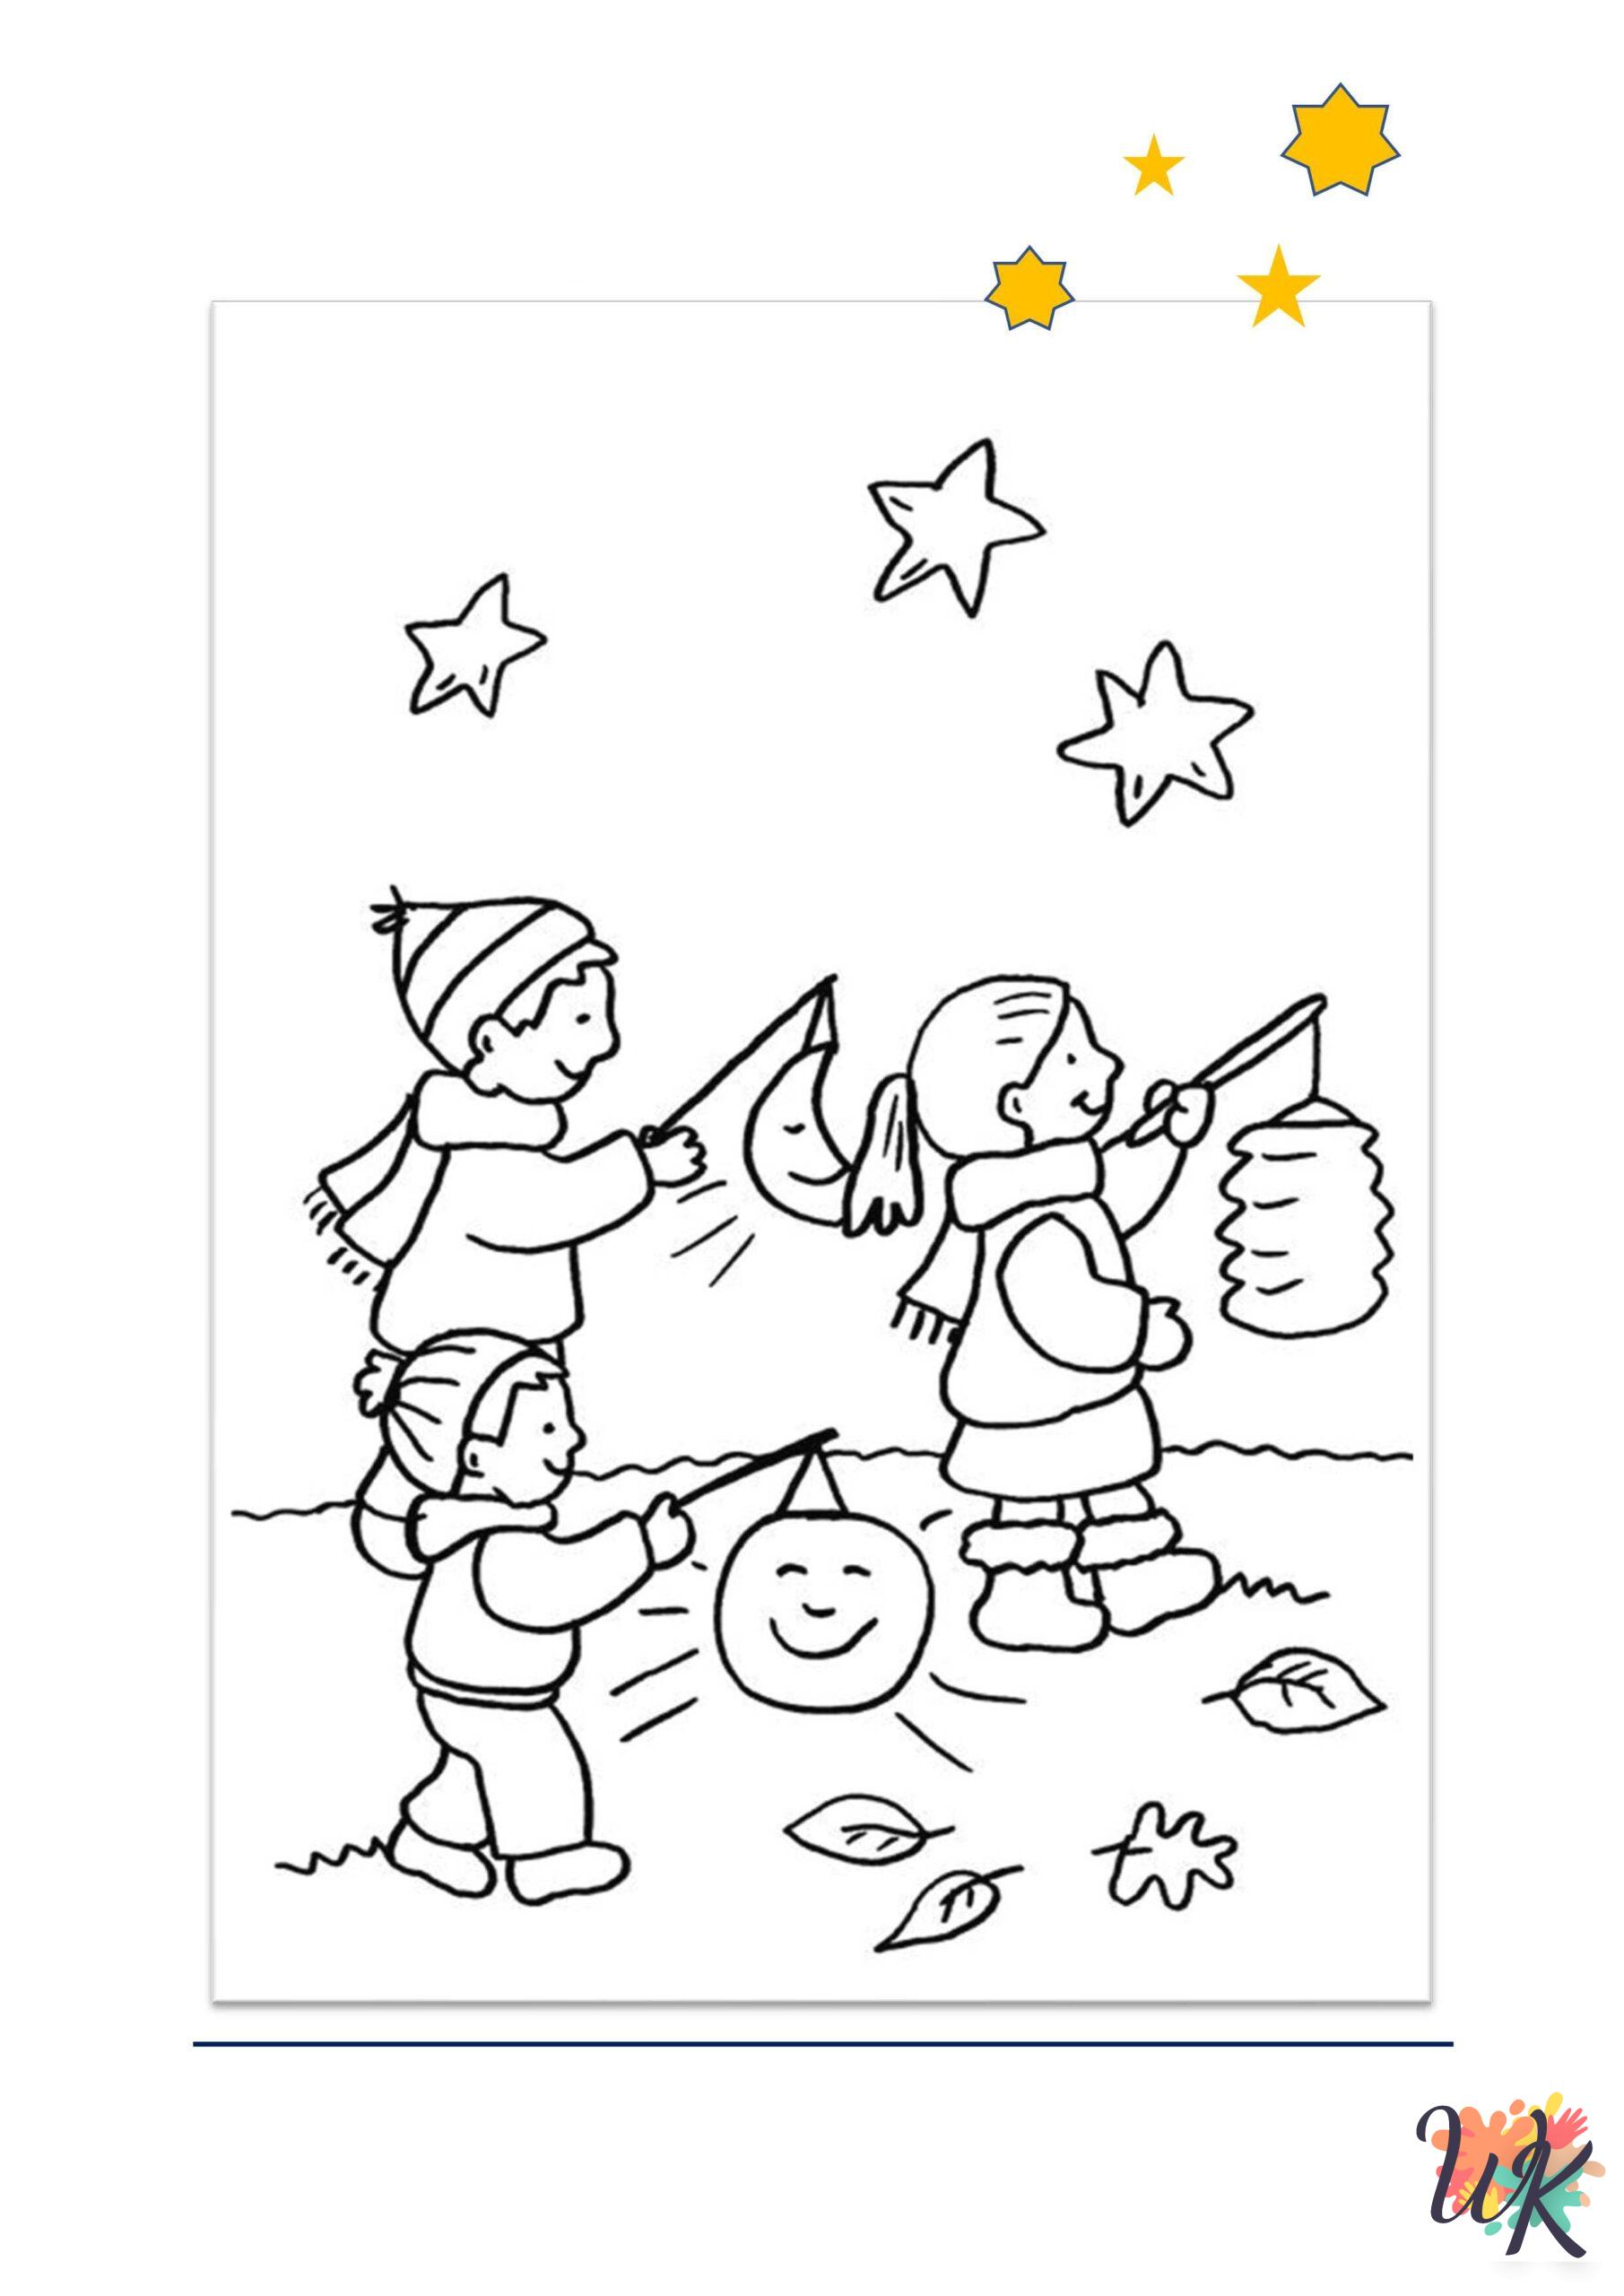 Saint Martin coloring pages free